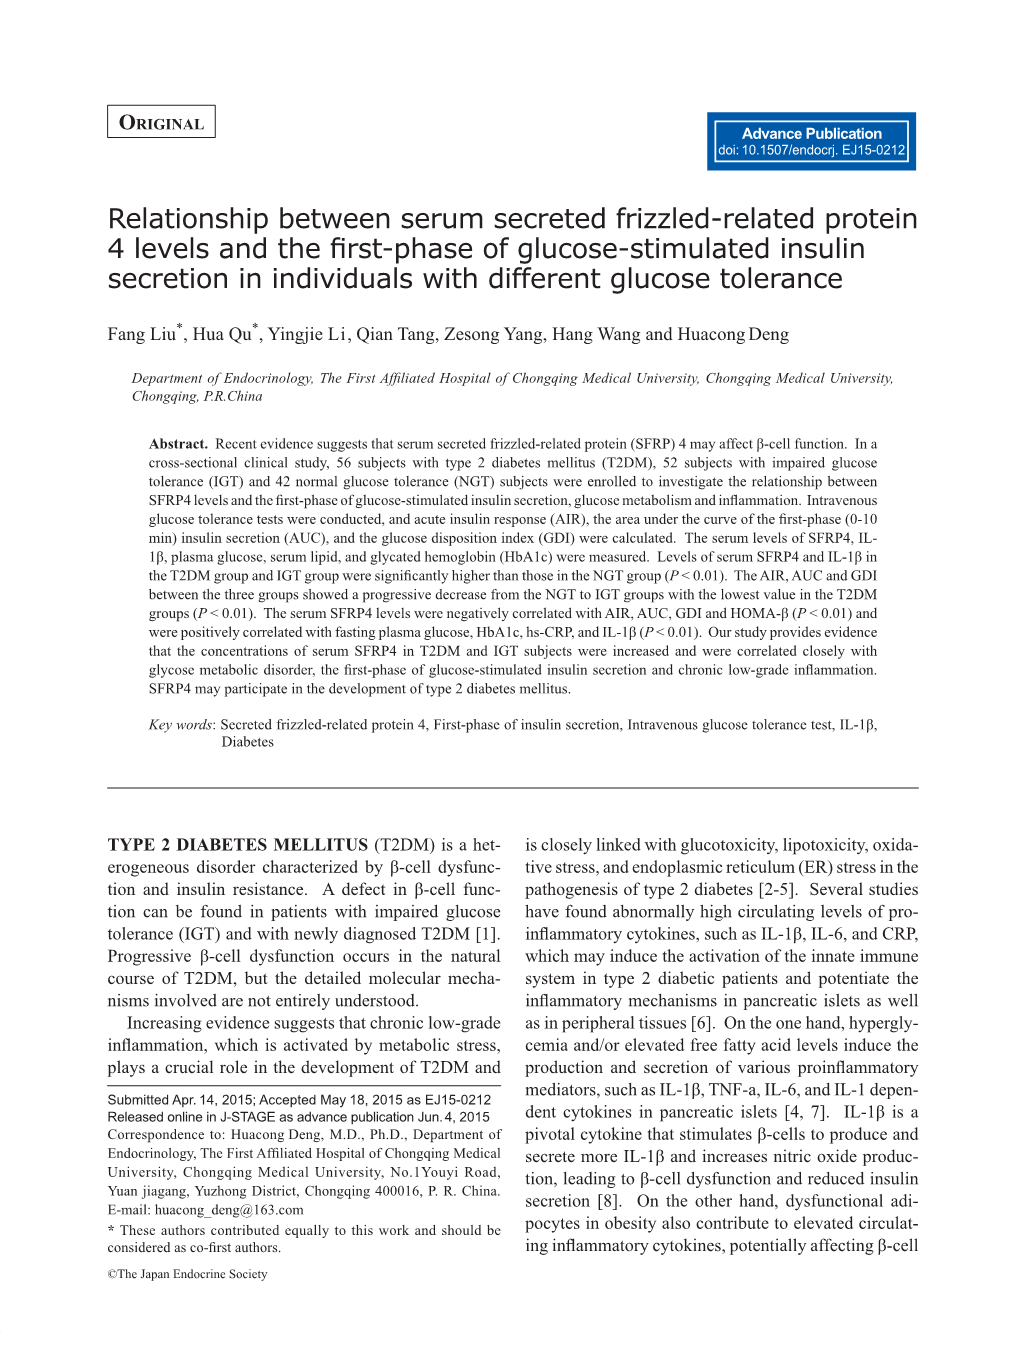 Relationship Between Serum Secreted Frizzled-Related Protein 4 Levels And